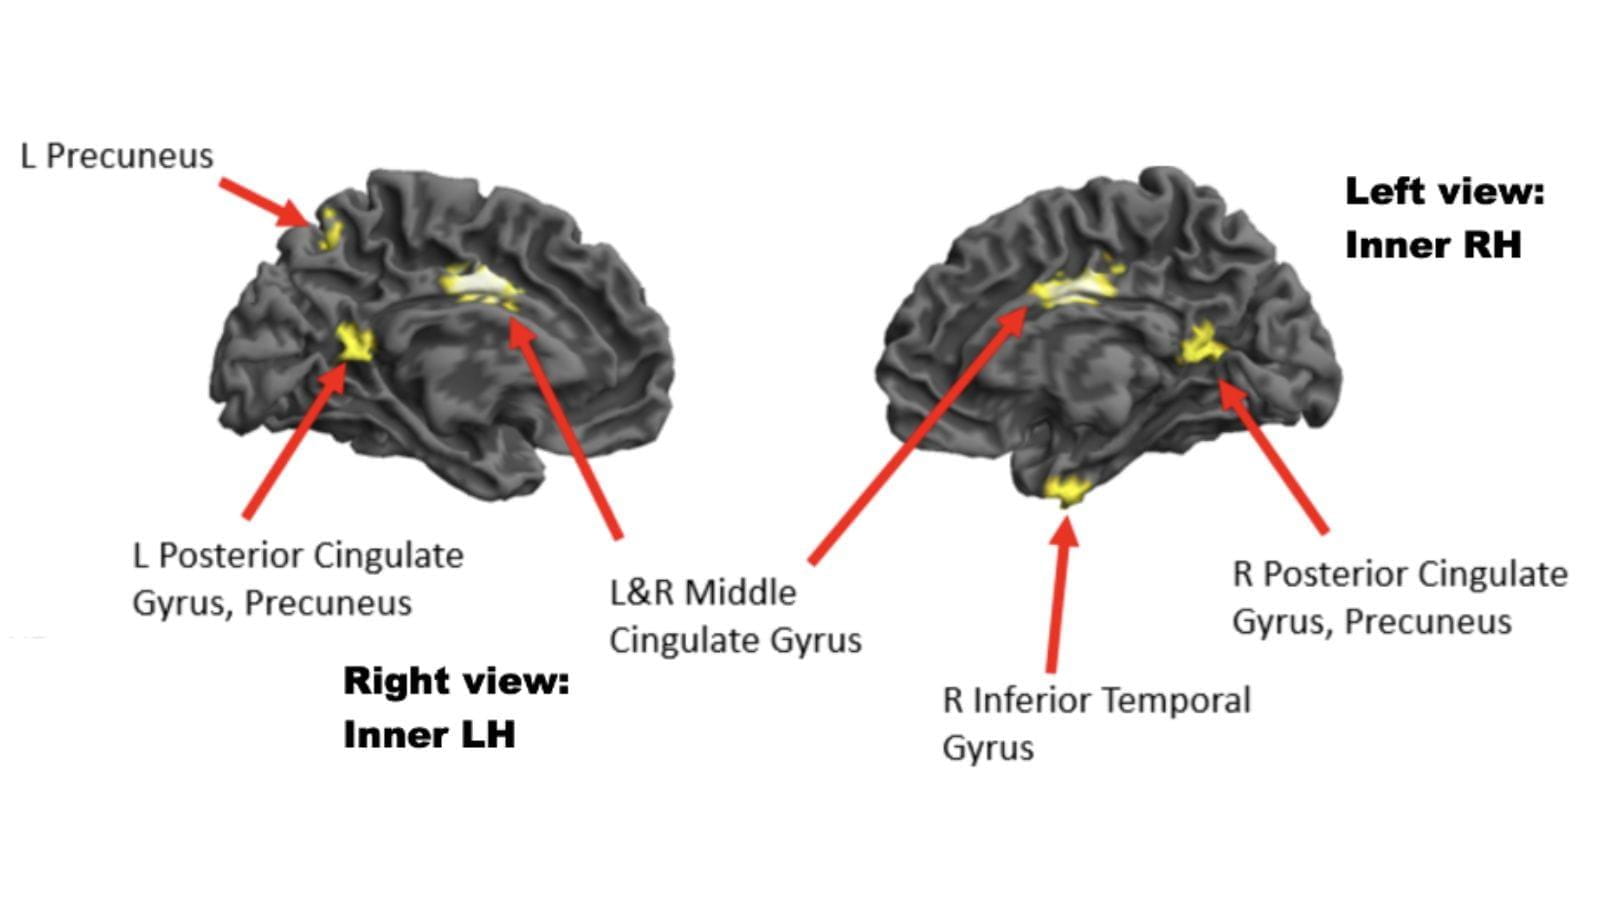 Image of inner views of left and right brain in gray, with arrows pointing to yellow spots showing reduced brain activity.